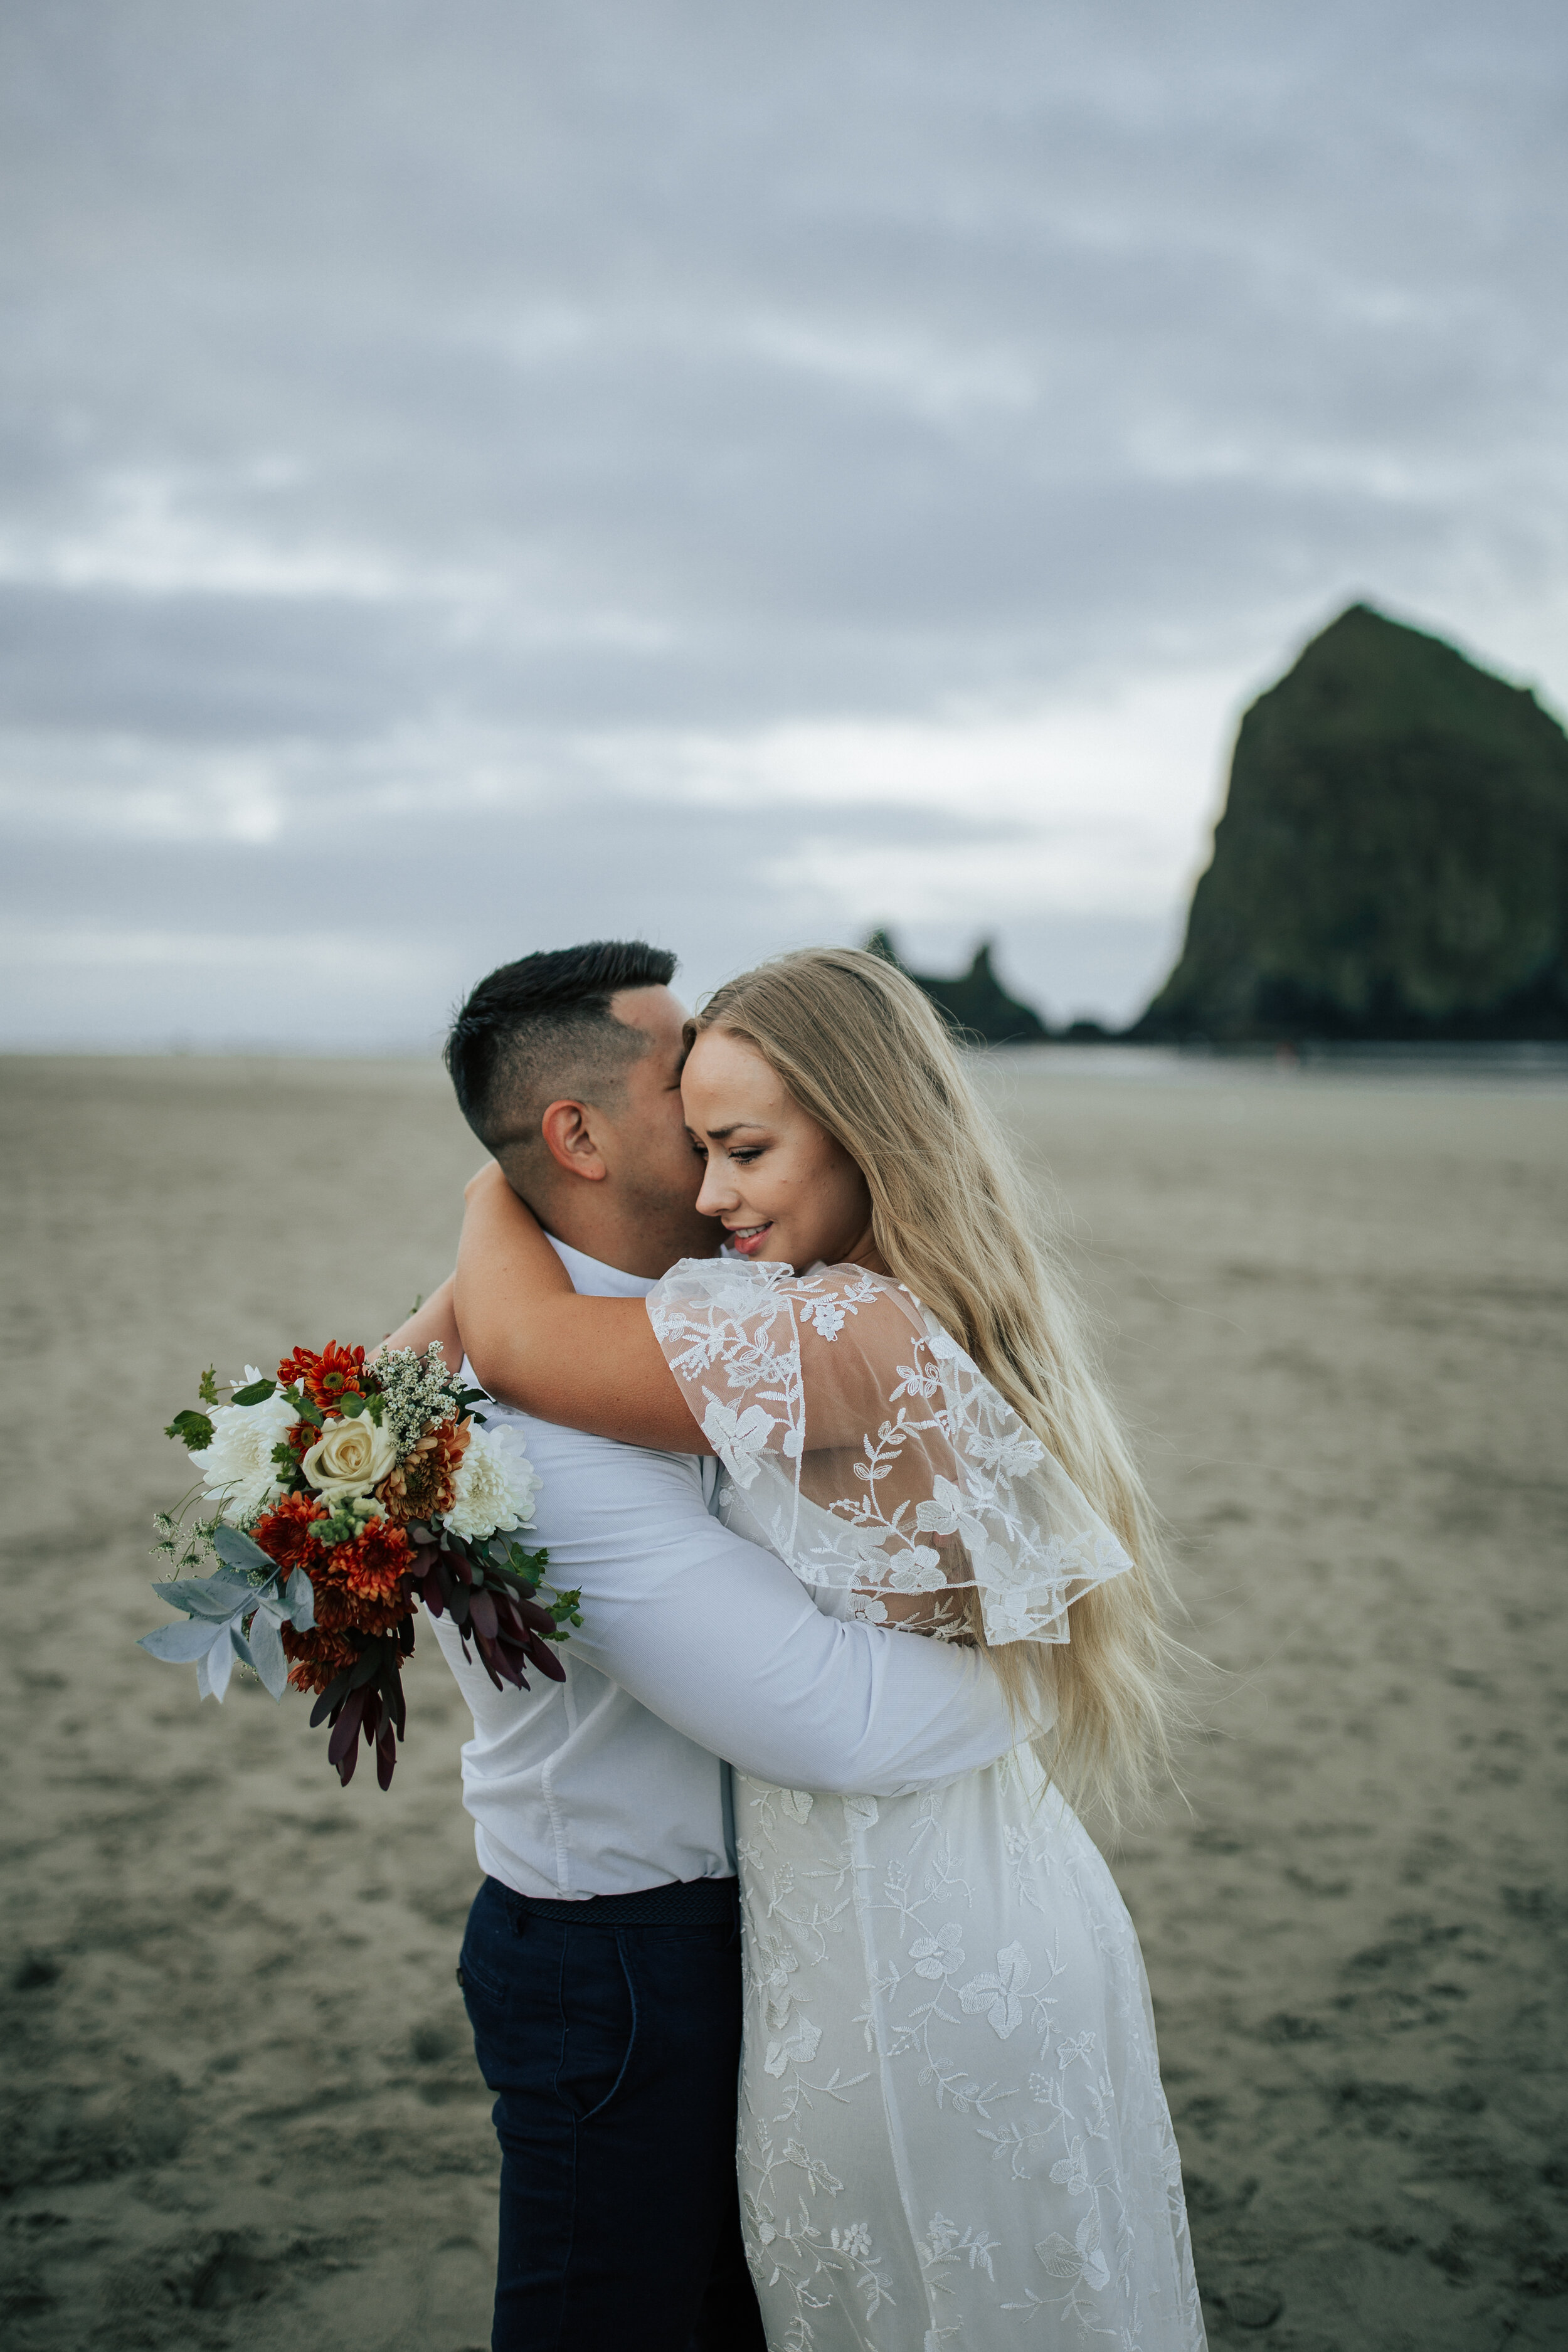  Husband and wife holding each other on Oregon coast beach landscape during vow renewal by Emily Jenkins Photography. Vow renewal poses vow travel ideas vow renewal dress lace dress beach renewal couple photography Oregon coast travel photography lin